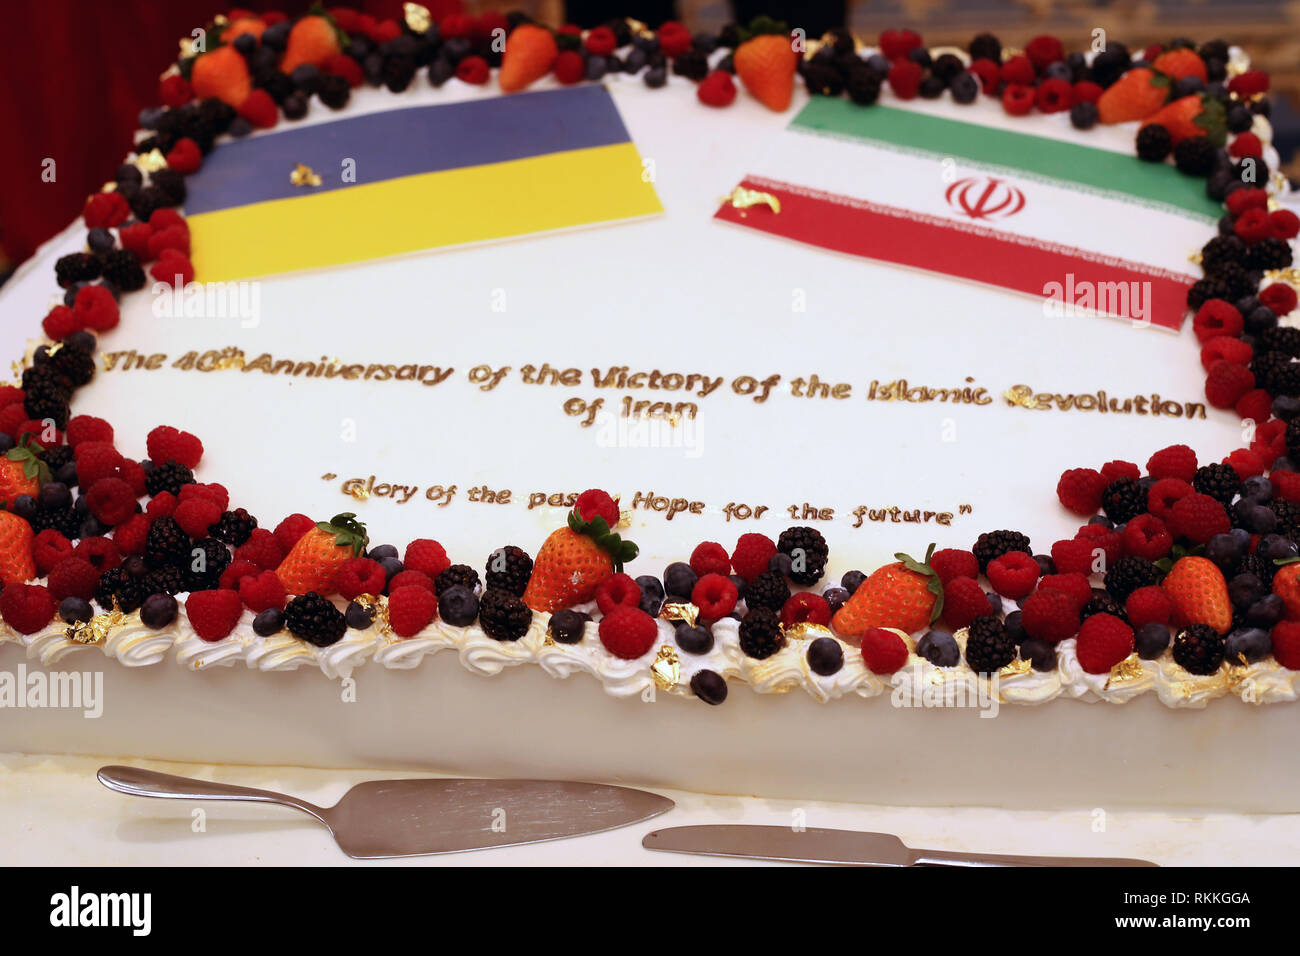 The cake of the 40th Anniversary of the victory of the Islamic Revolution of Iran seen during an hosting event by the embassy of the Islamic Republic of Iran in Kiev. Stock Photo